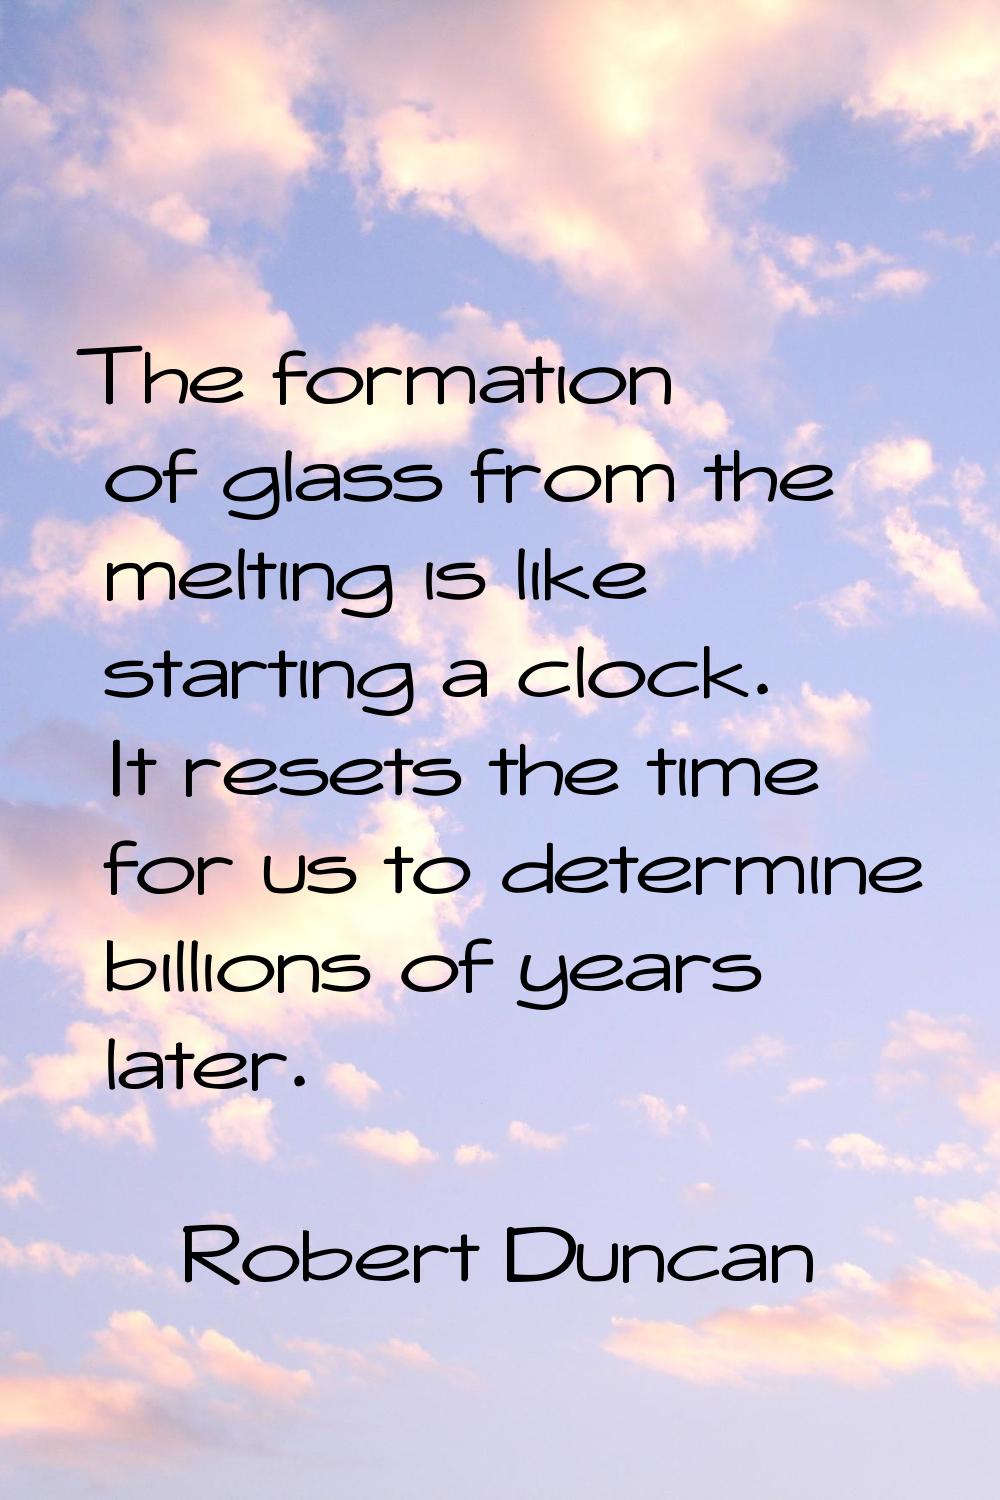 The formation of glass from the melting is like starting a clock. It resets the time for us to dete